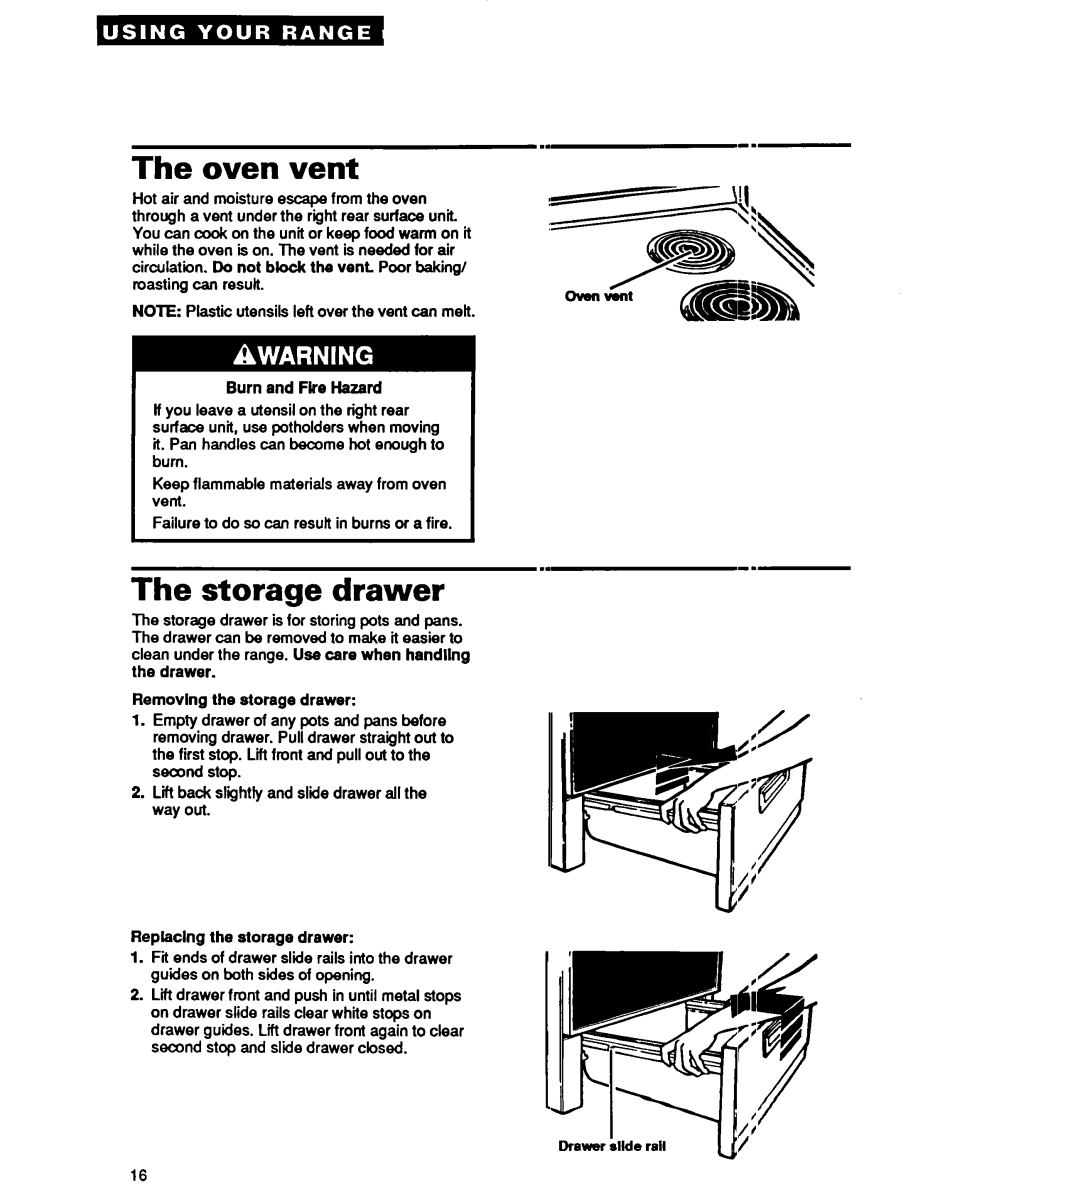 Whirlpool TER20WOY manual The oven vent, The storage drawer, Burn and Fke Hazard, Removlng the storage drawer 